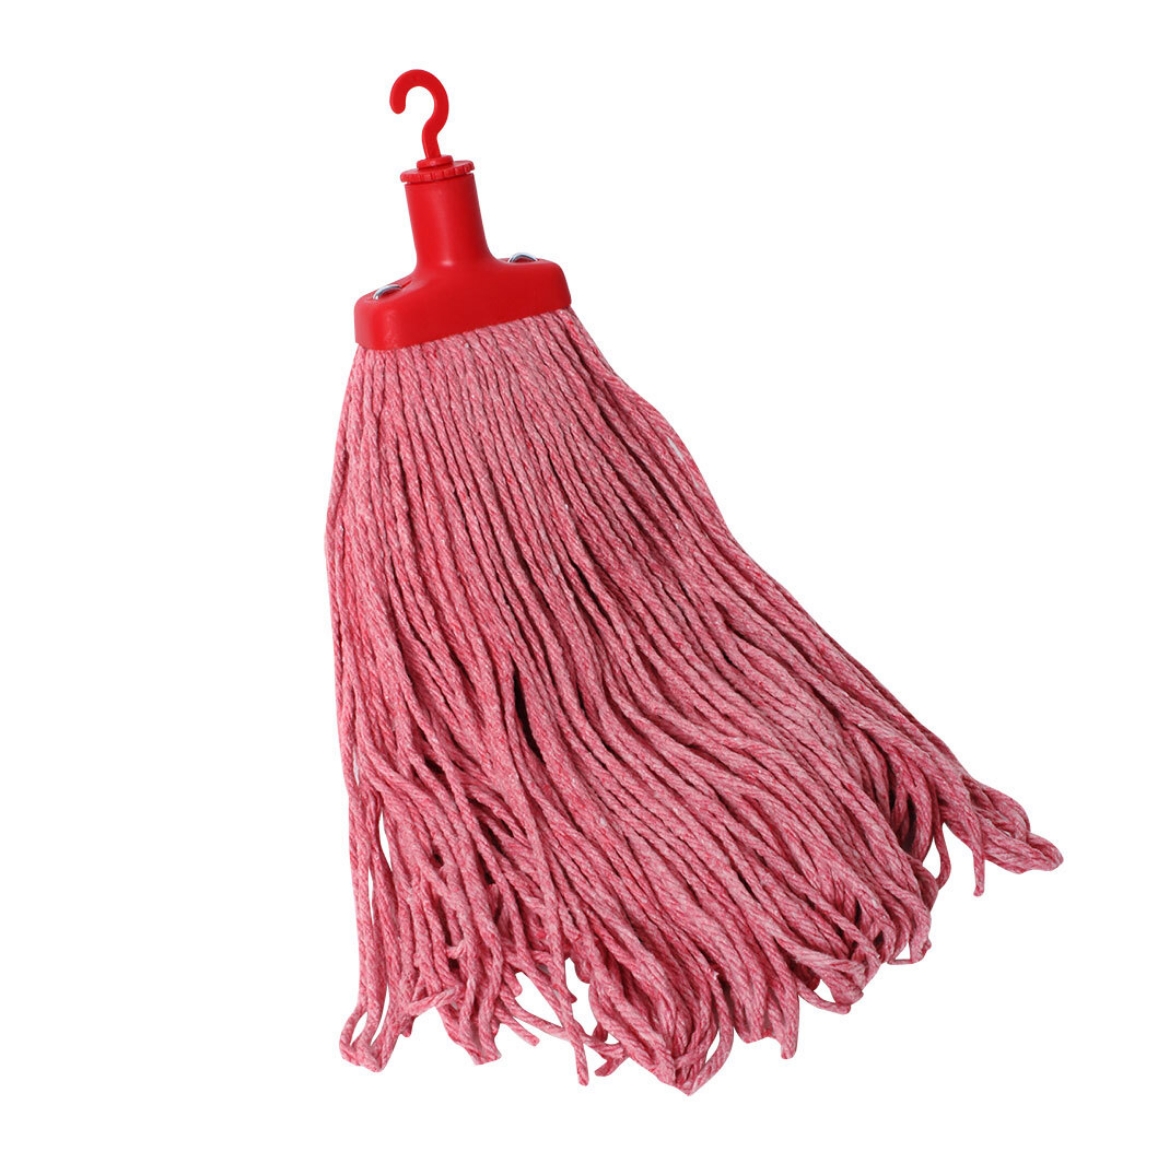 Picture of SABCO 400G COMMERCIAL COTTON MOP HEAD - RED